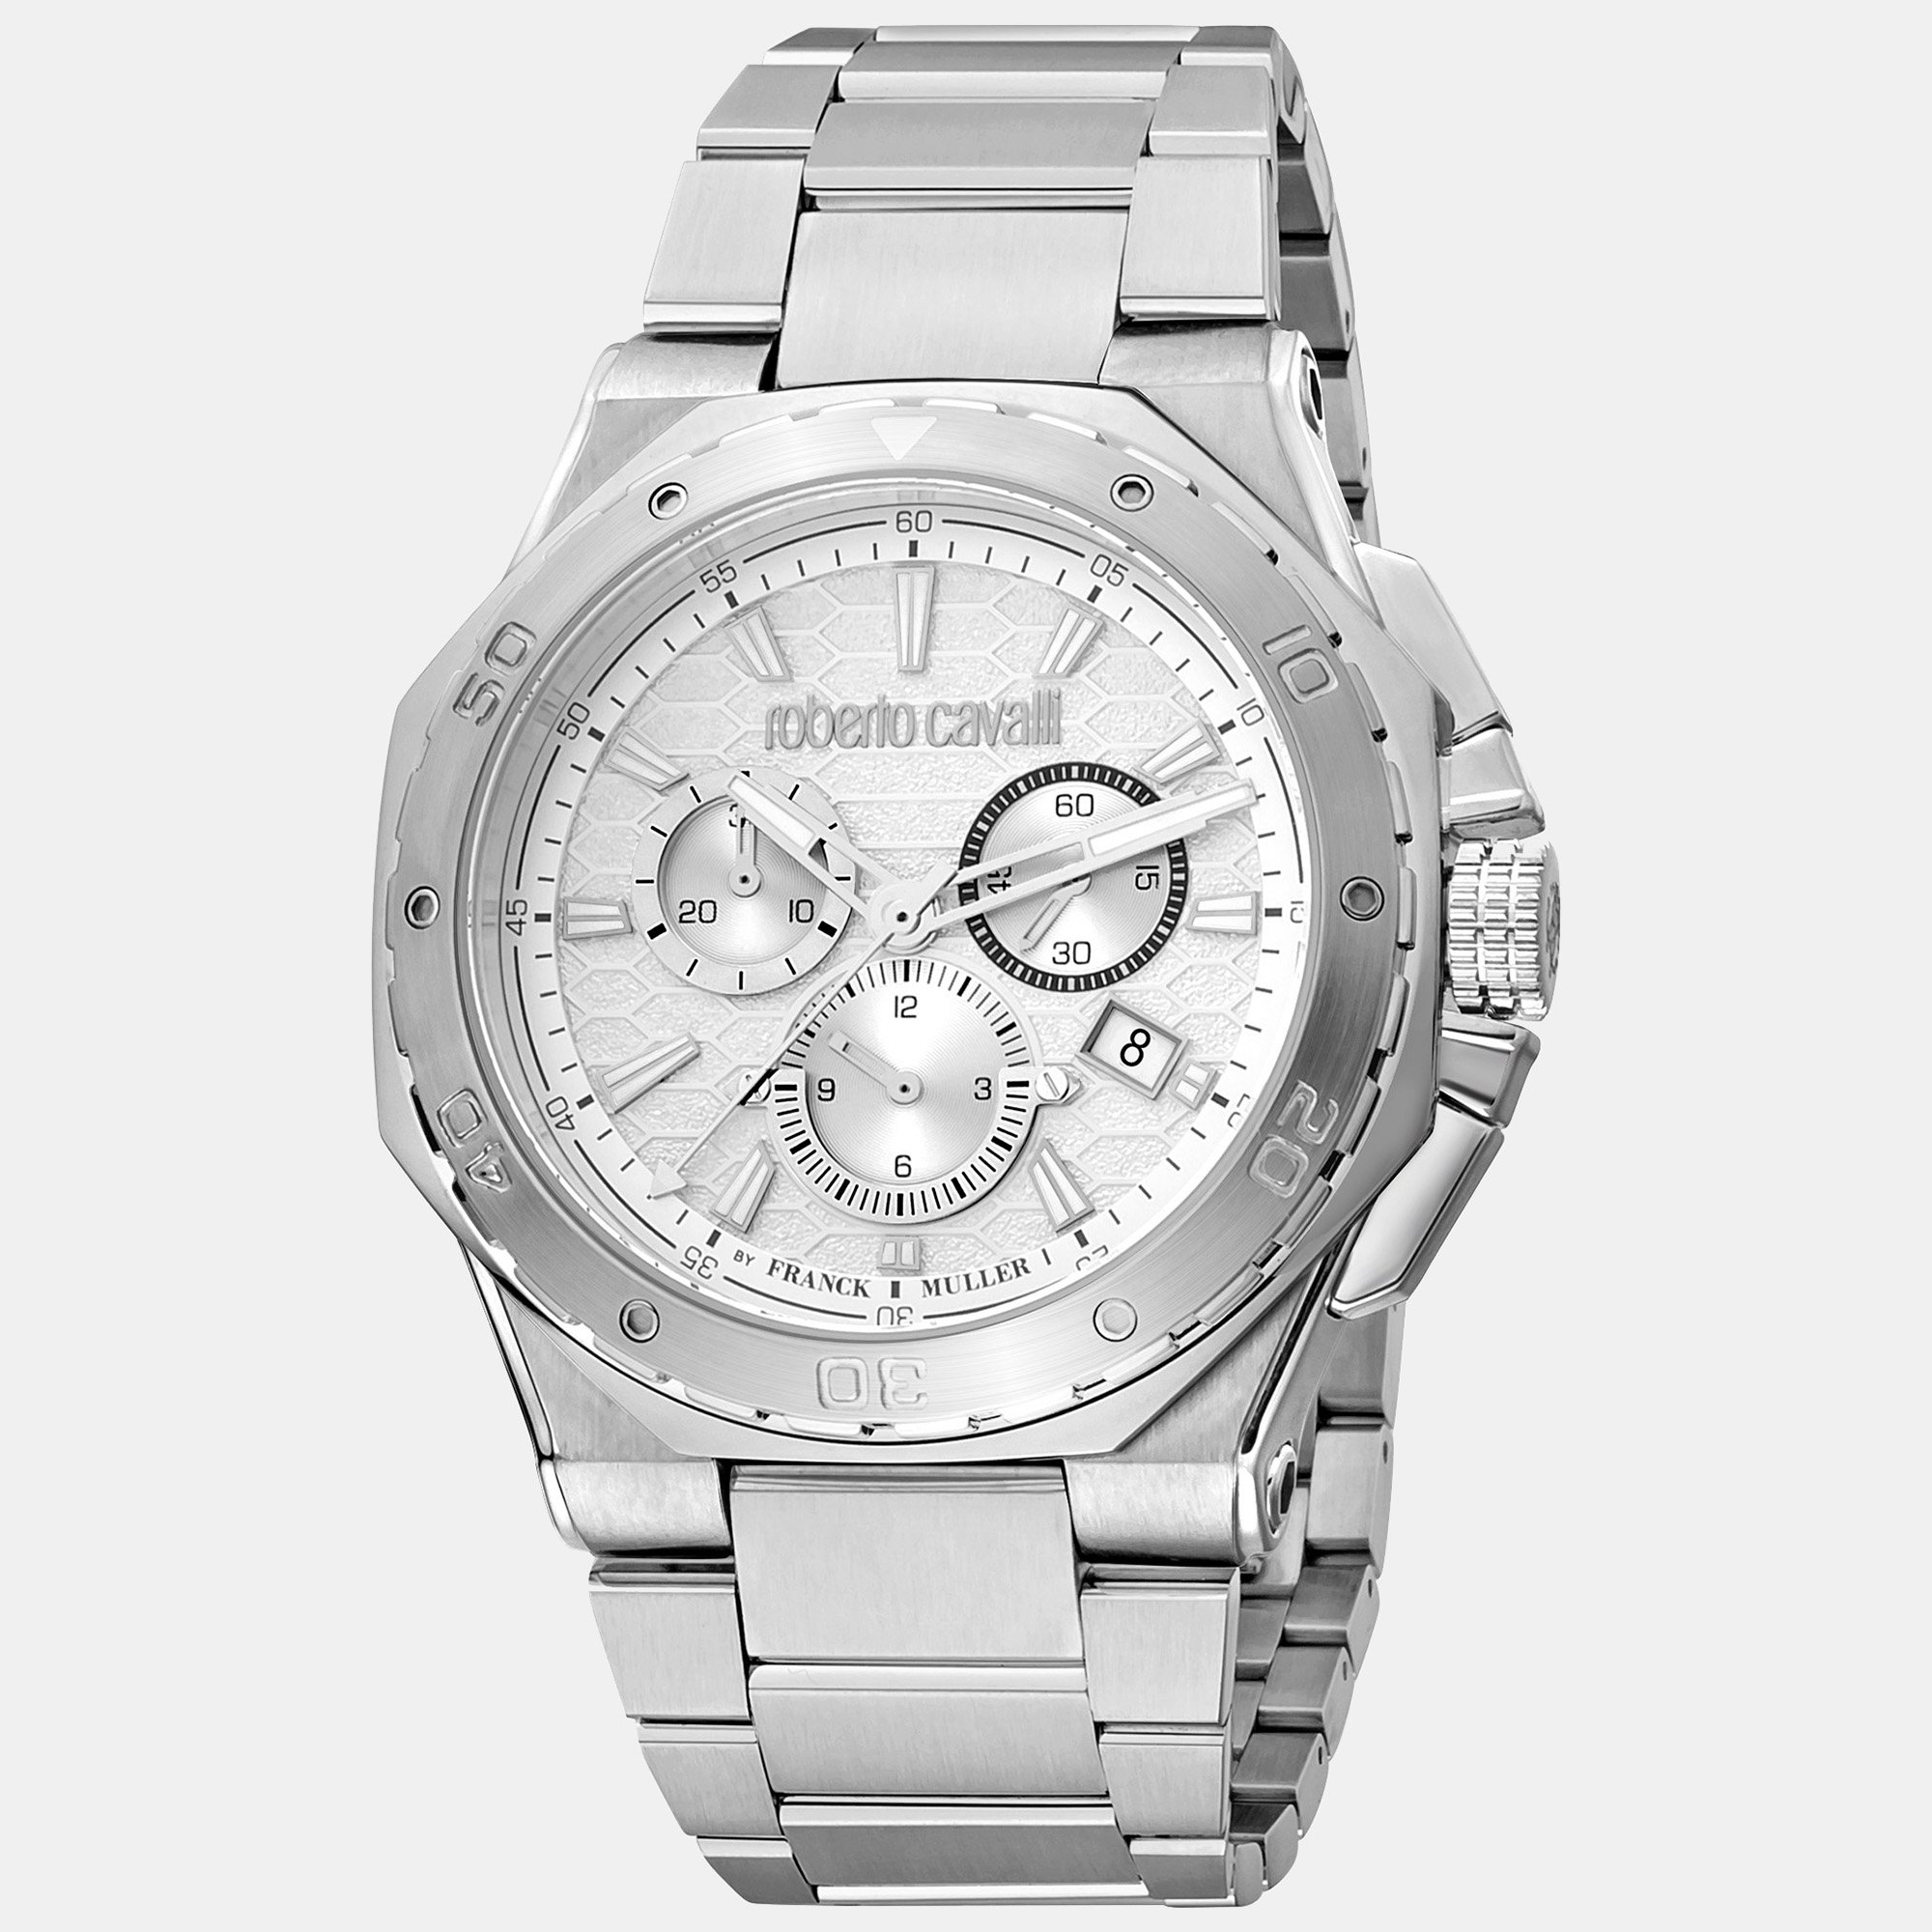 Let this fine Roberto Cavalli wristwatch accompany you with ease and luxurious style. Beautifully crafted using the best quality materials this authentic branded watch is built to be a standout accessory for your wrist.